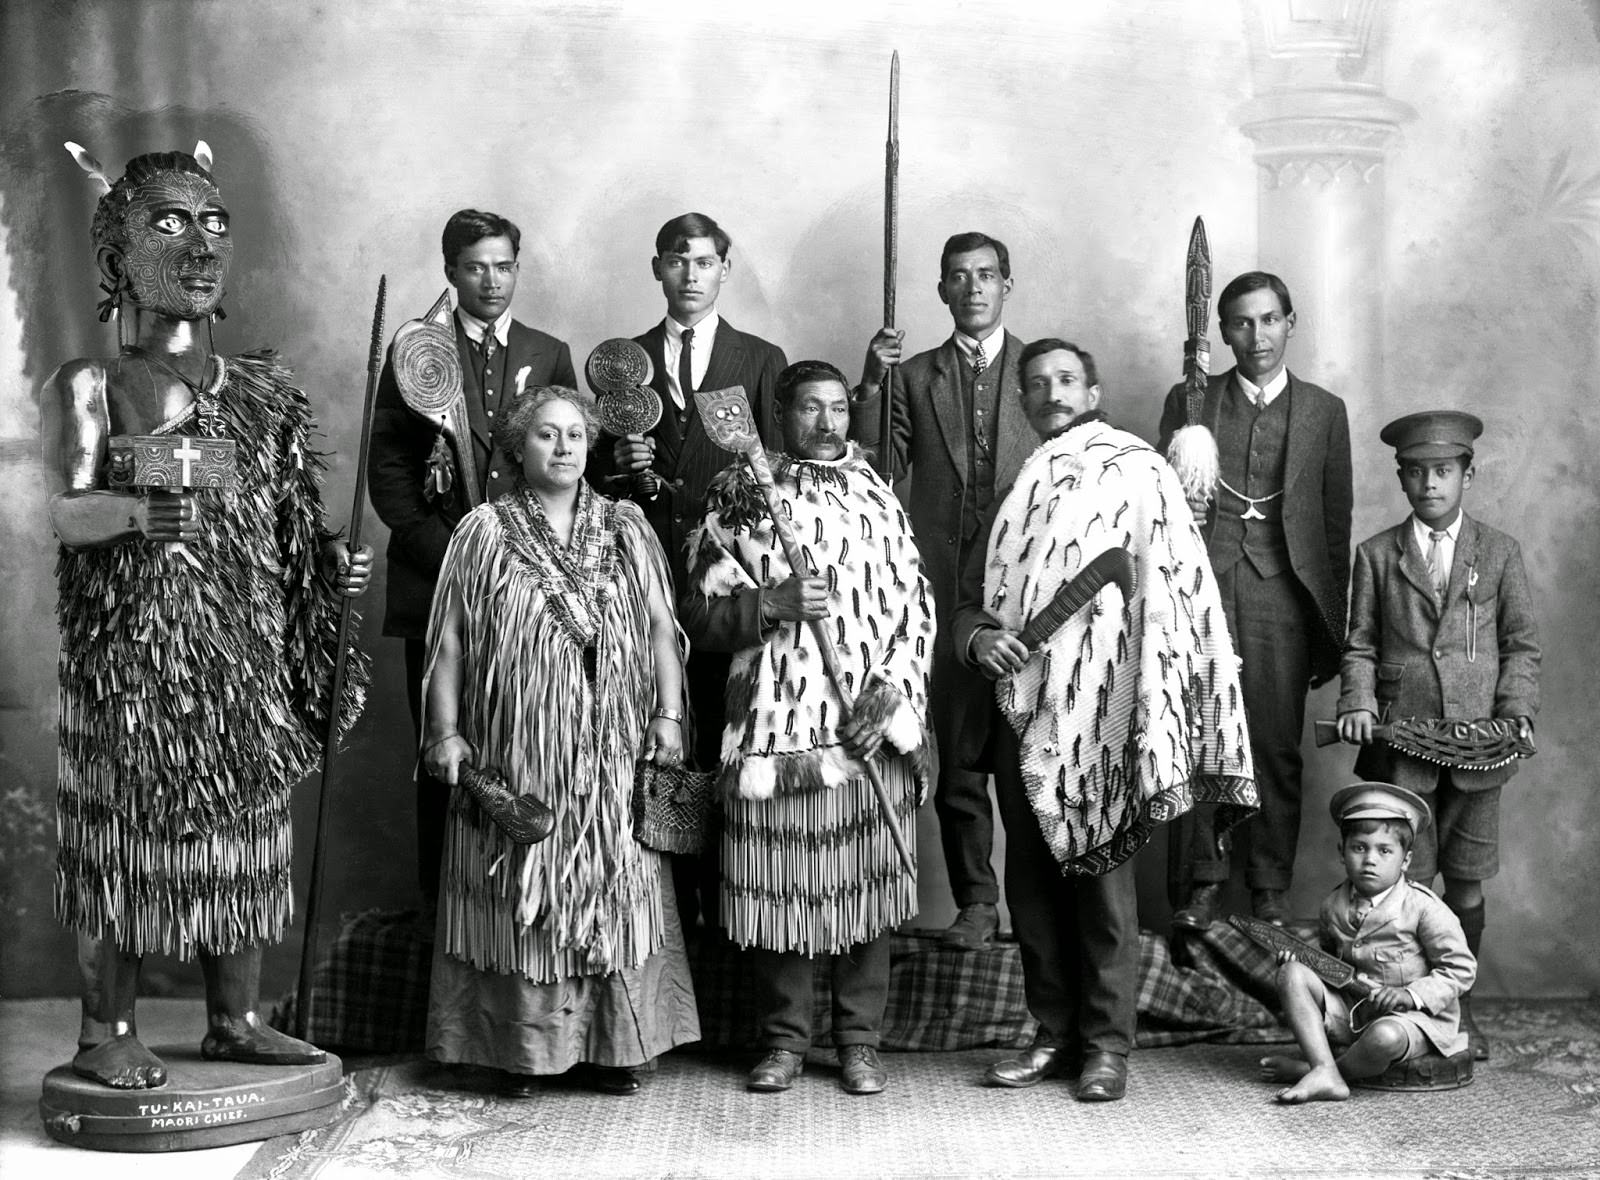 A Maori family standing alongside a carved figure of the Maori chief Tu-Kai-Taua and each person holding a carved wooden Maori weapon in New Zealand in 1915.